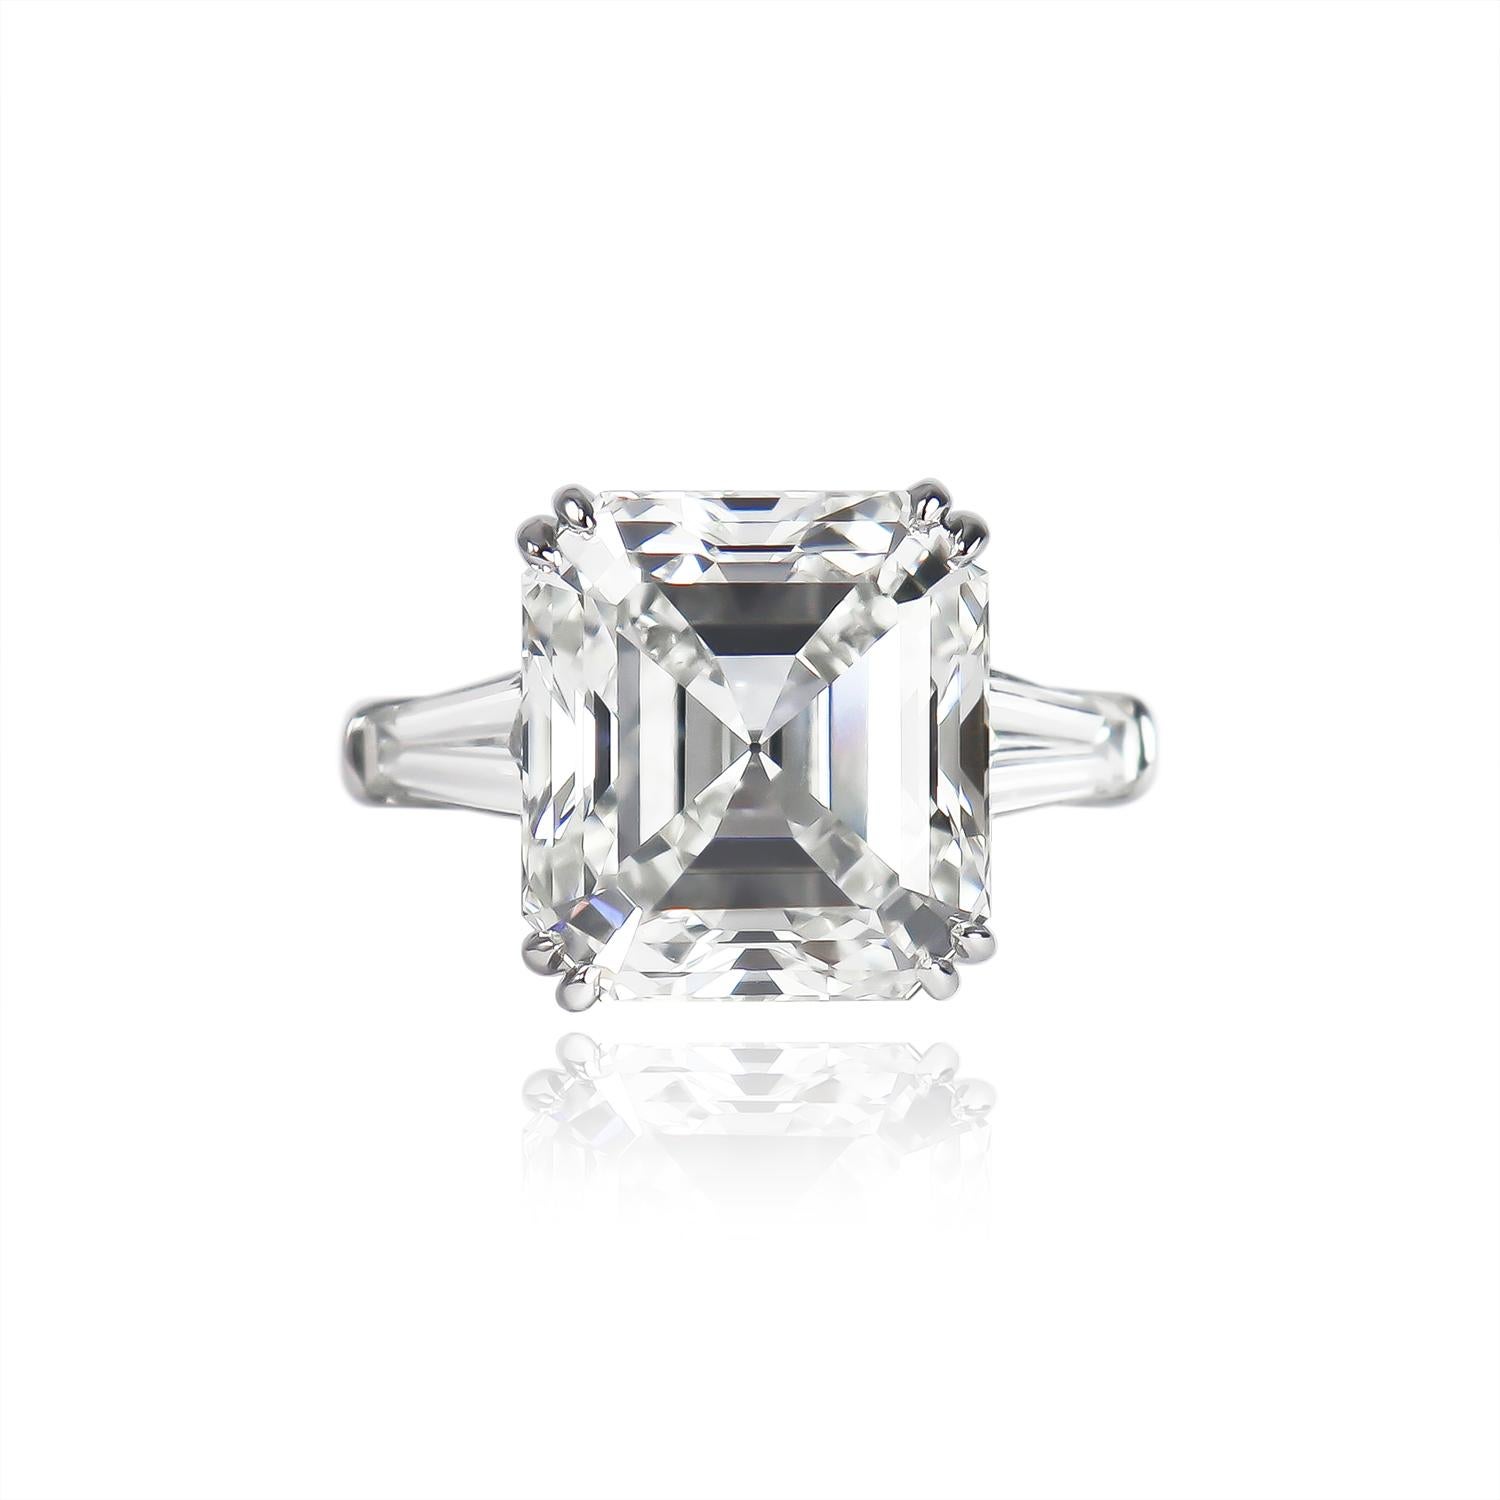 This classically designed ring from the J. Birnbach workshop features an 8.21 carat square, emerald cut diamond of G color and VS1 clarity with no fluorescence. Set in a handmade, platinum, three-stone ring with tapered baguette side stones = 0.75